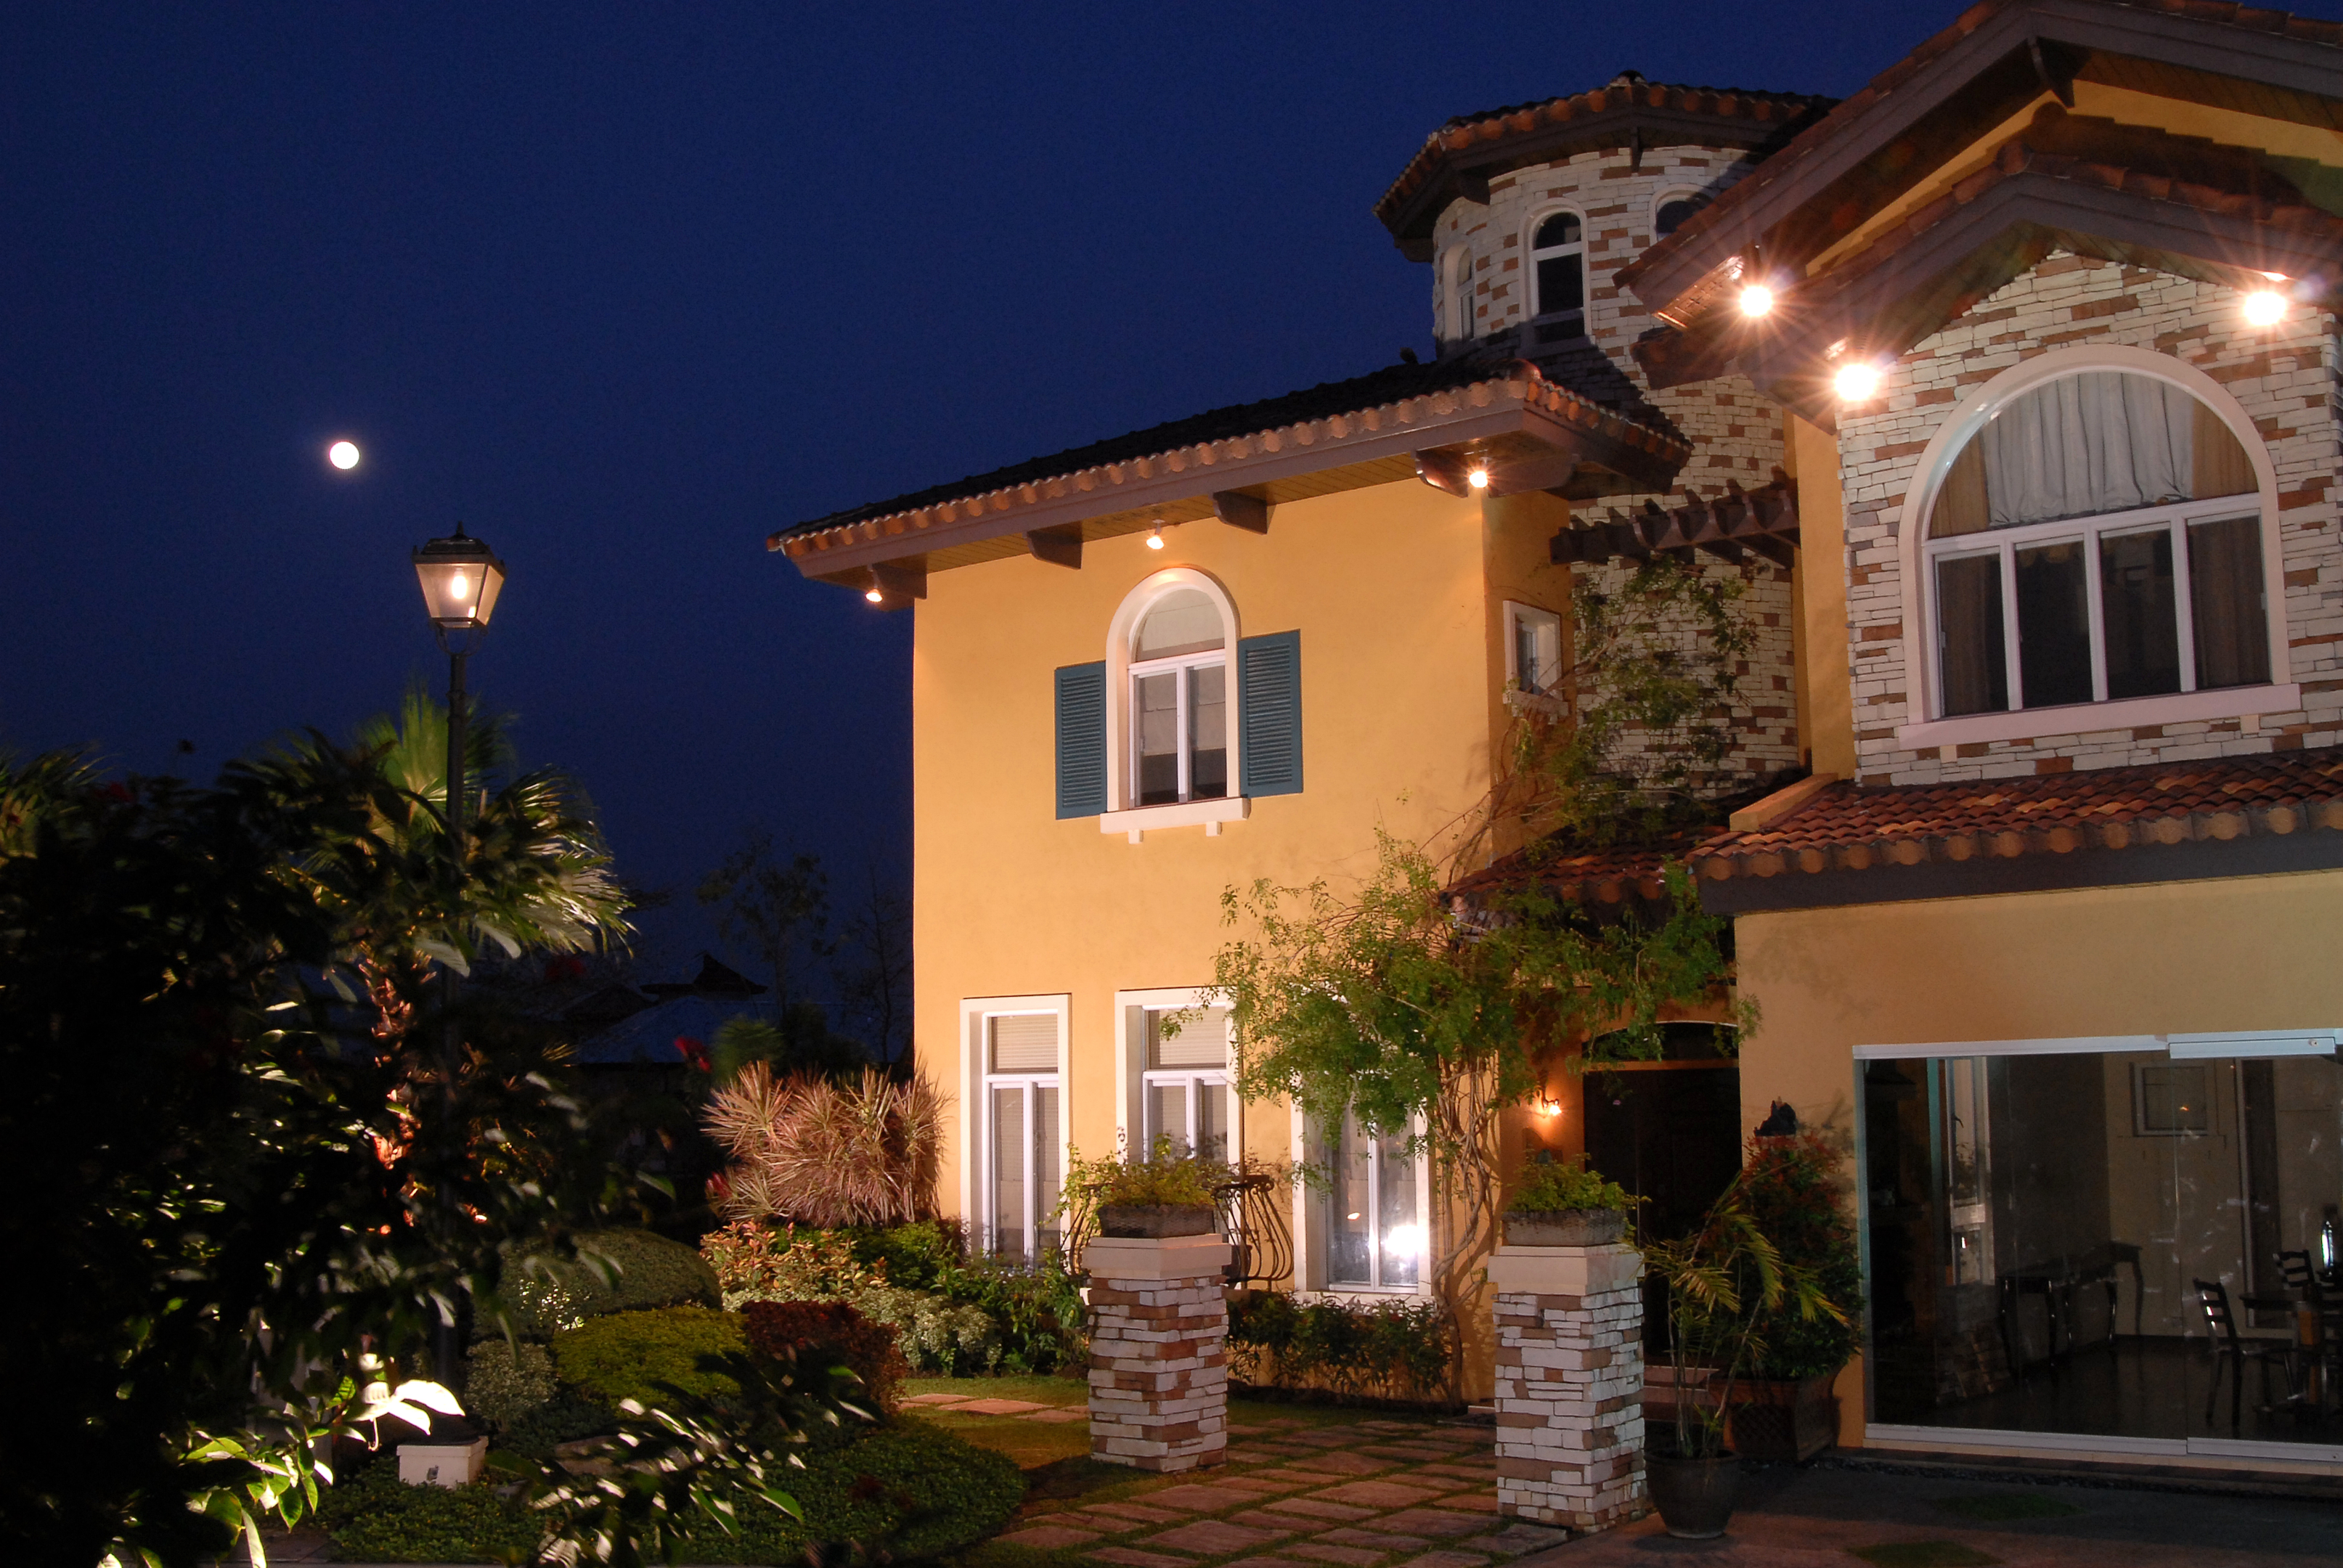 Go home to an Italian-inspired luxury house here in Vista Alabang.